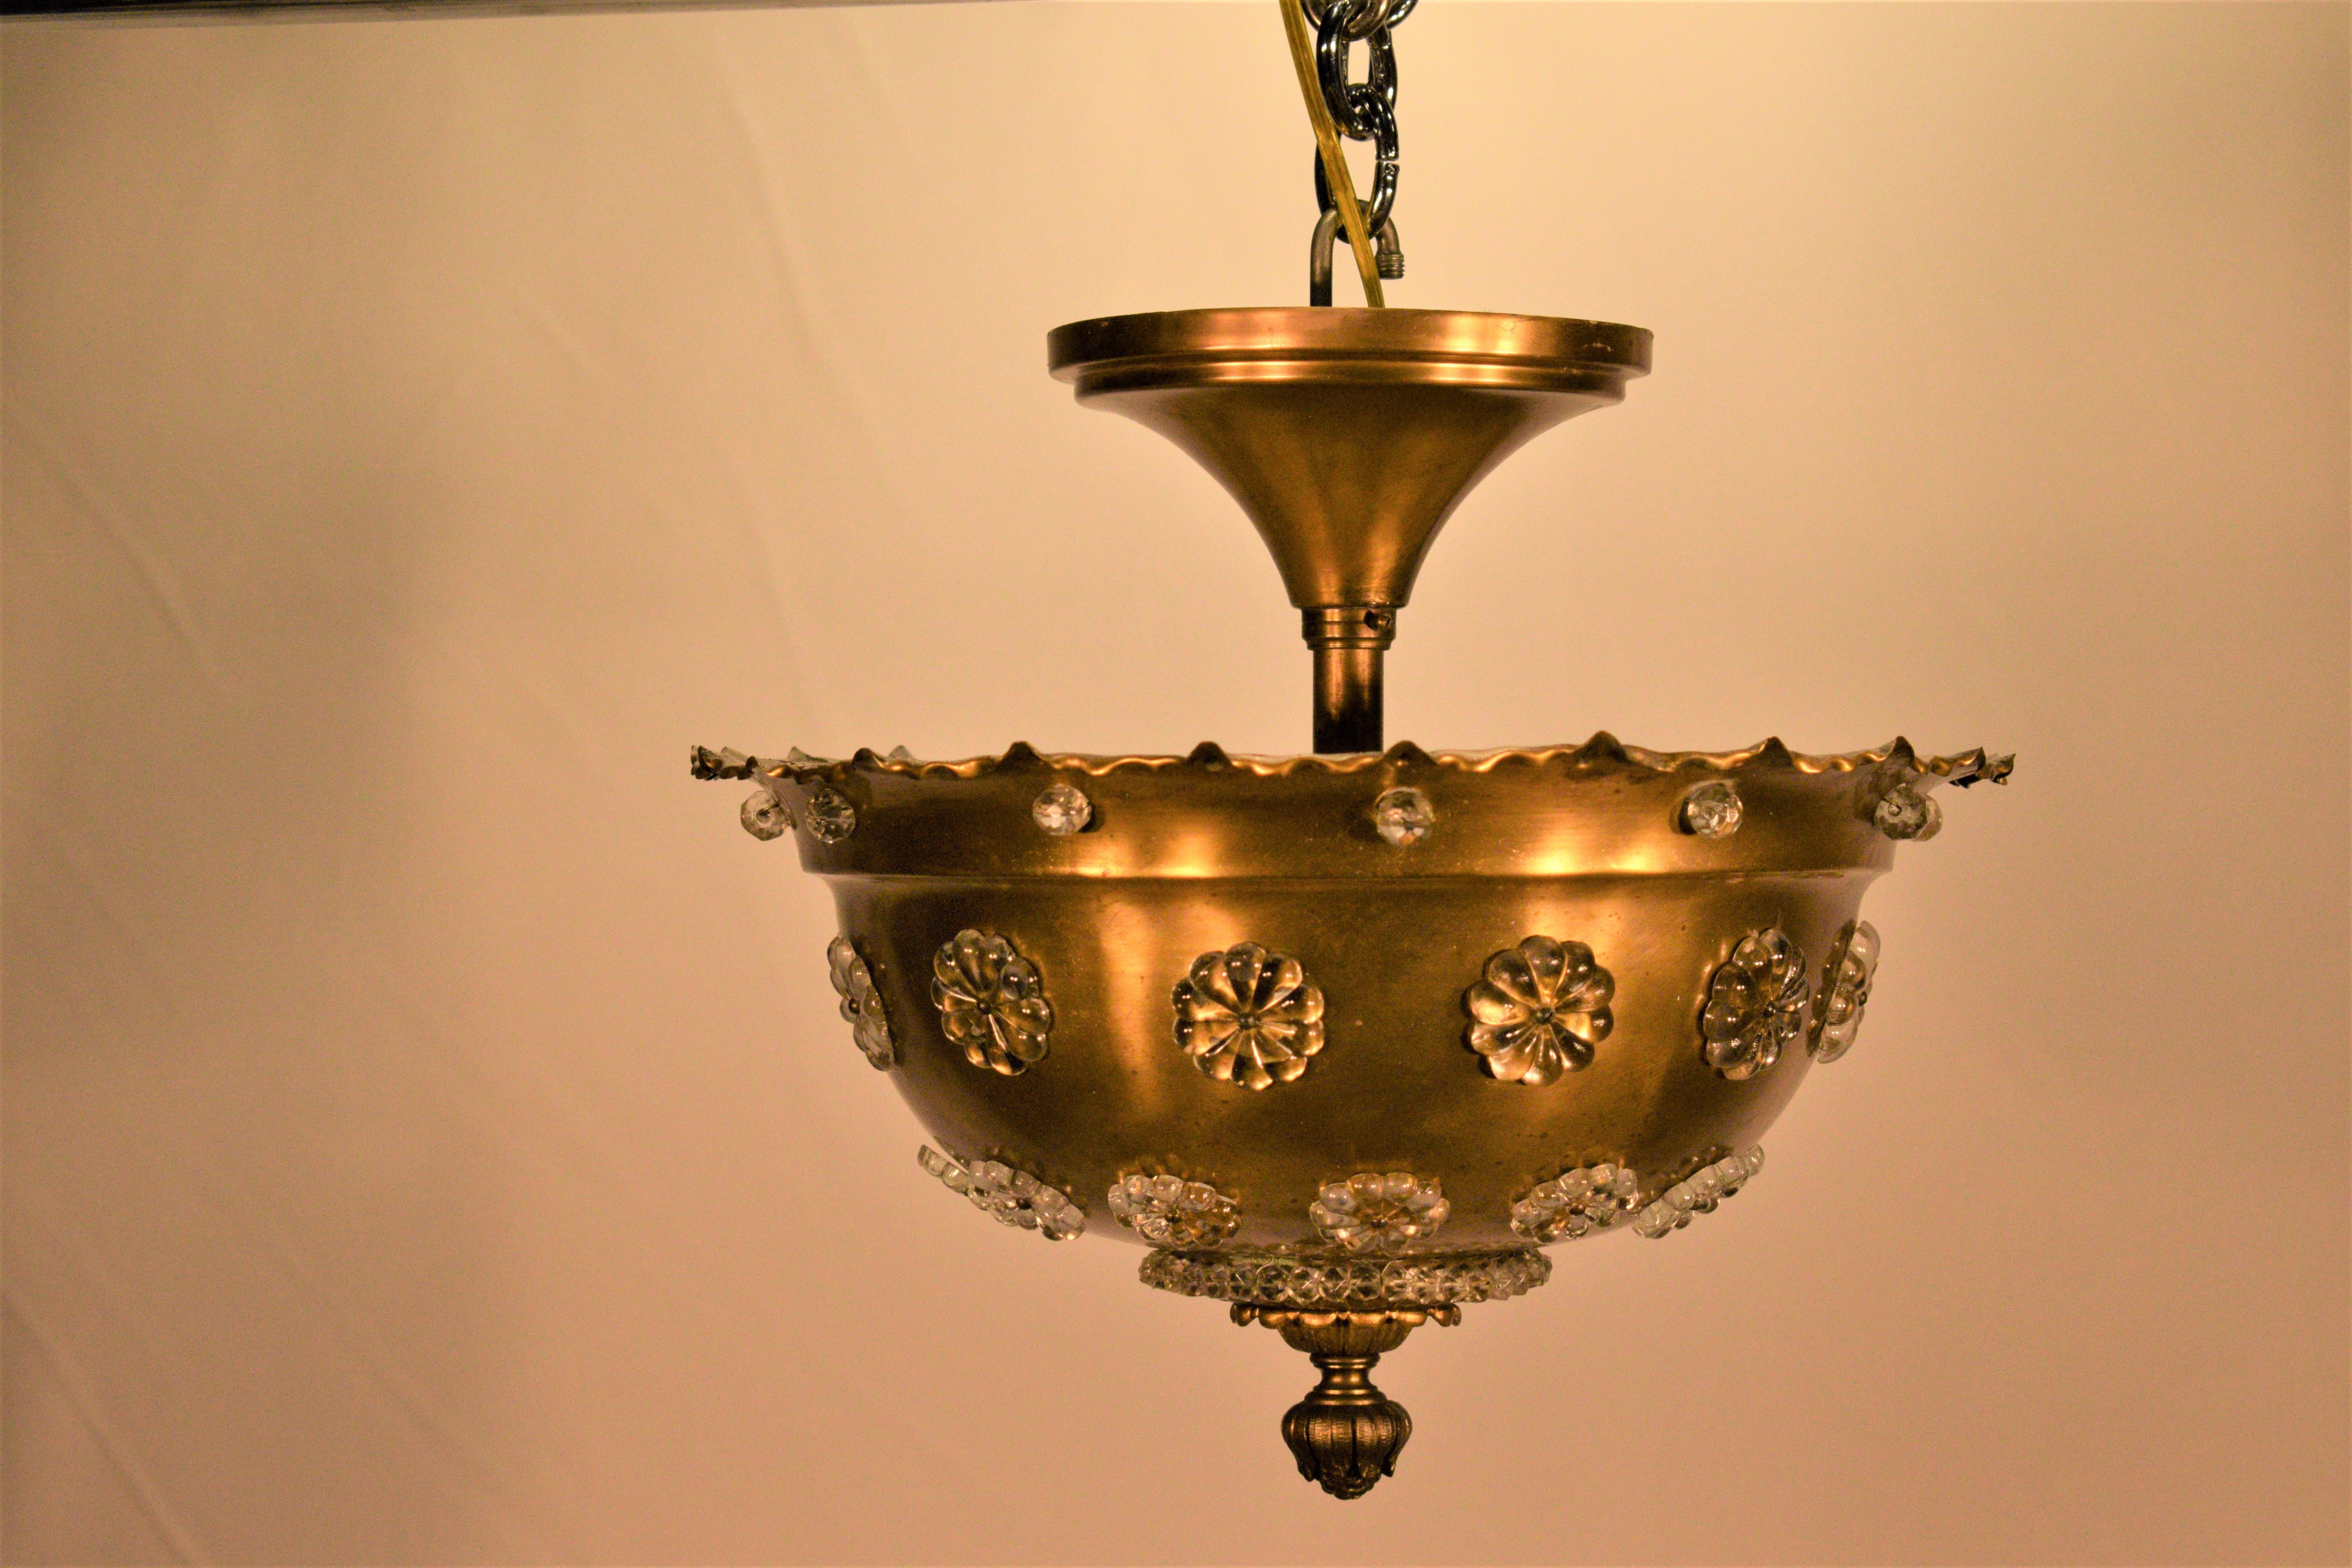 A very fine gilt bronze and crystal Plafonnier, France, circa 1930. 3 lights
Dimensions: Height 10 1/2